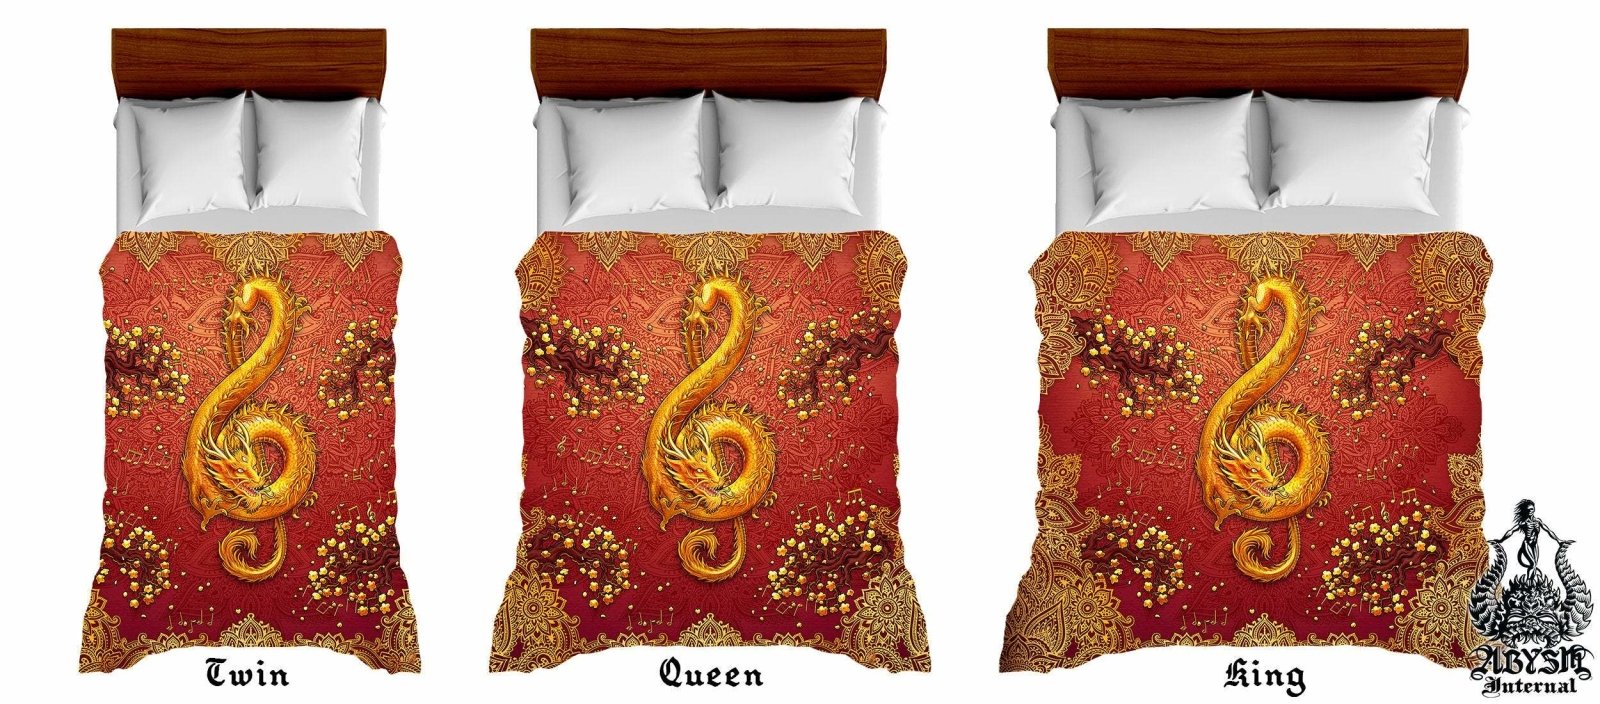 Boho Bedding Set, Comforter and Duvet, Music Art, Hippie Bed Cover and Bedroom Decor, King, Queen and Twin Size - Gold Dragon, Mandalas - Abysm Internal